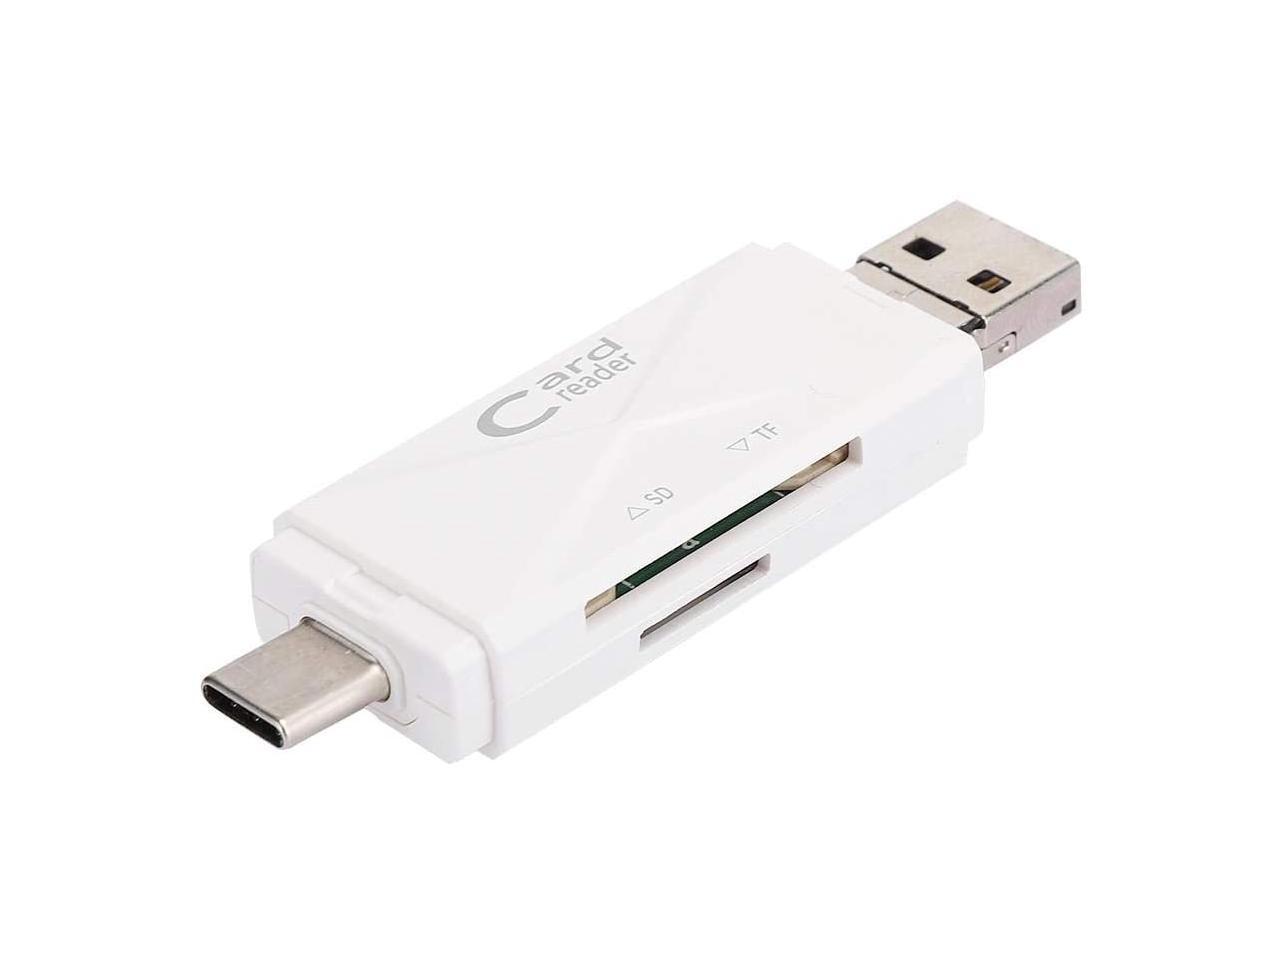 White, Pisa Leaning Tower Type Cuifati Portable Card Reader Plug and Play Stable Accurate and Reliable in Reading for shortdistance Recognition or Background Card Issuer Management 